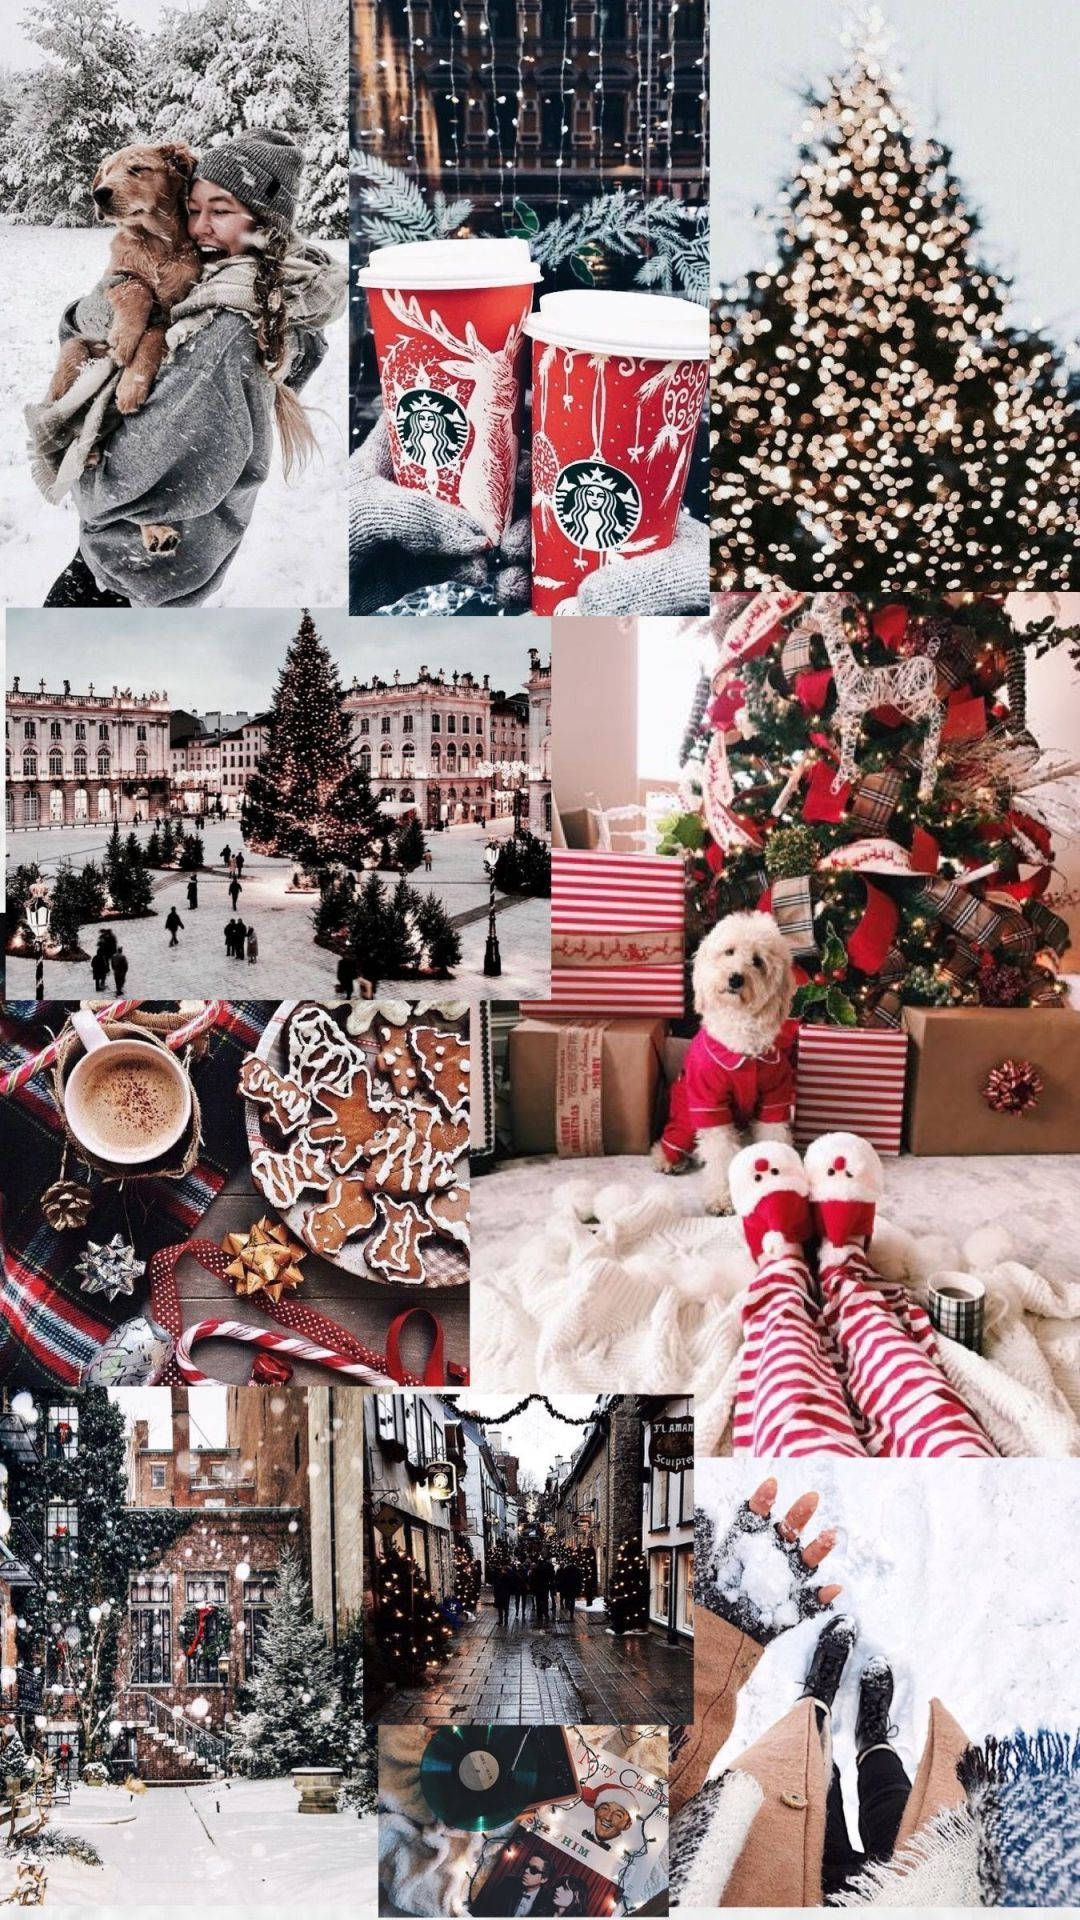 Download Christmas Season IPhone Aesthetic Collage Wallpaper | Wallpapers .com